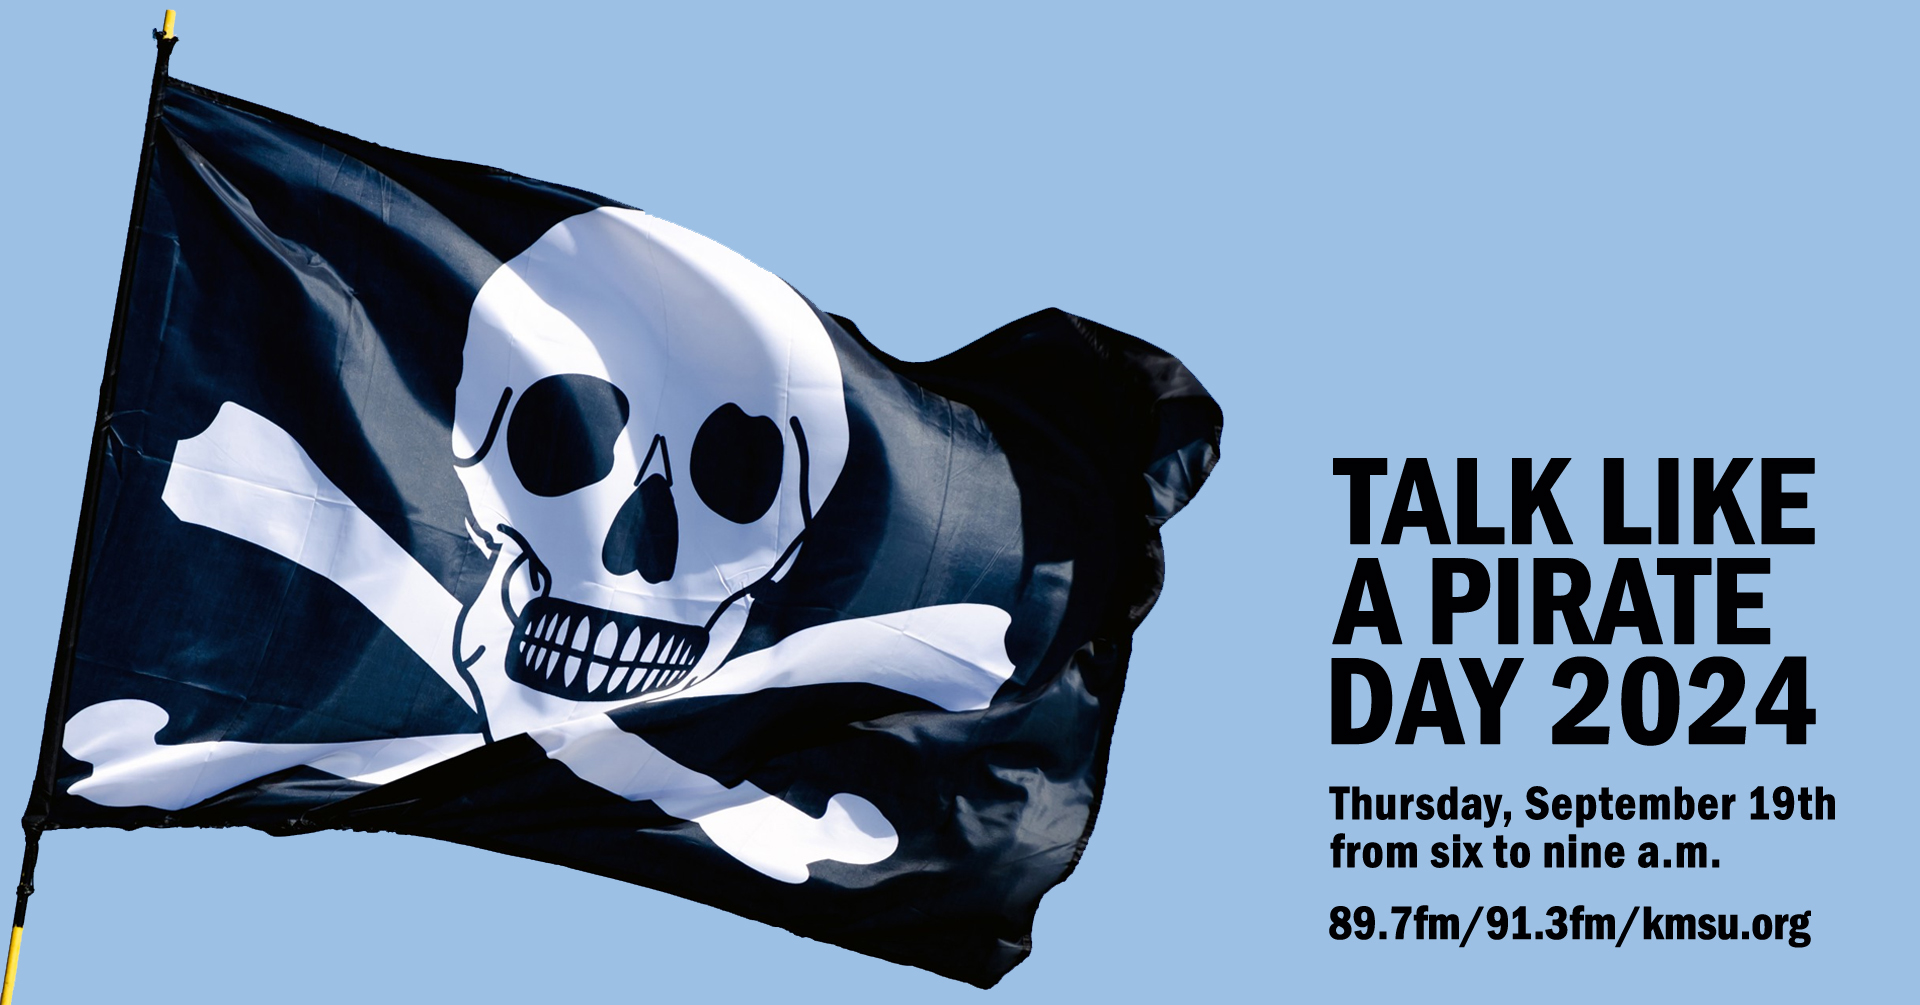 Pirate flag announcing Talk Like a Pirate Day